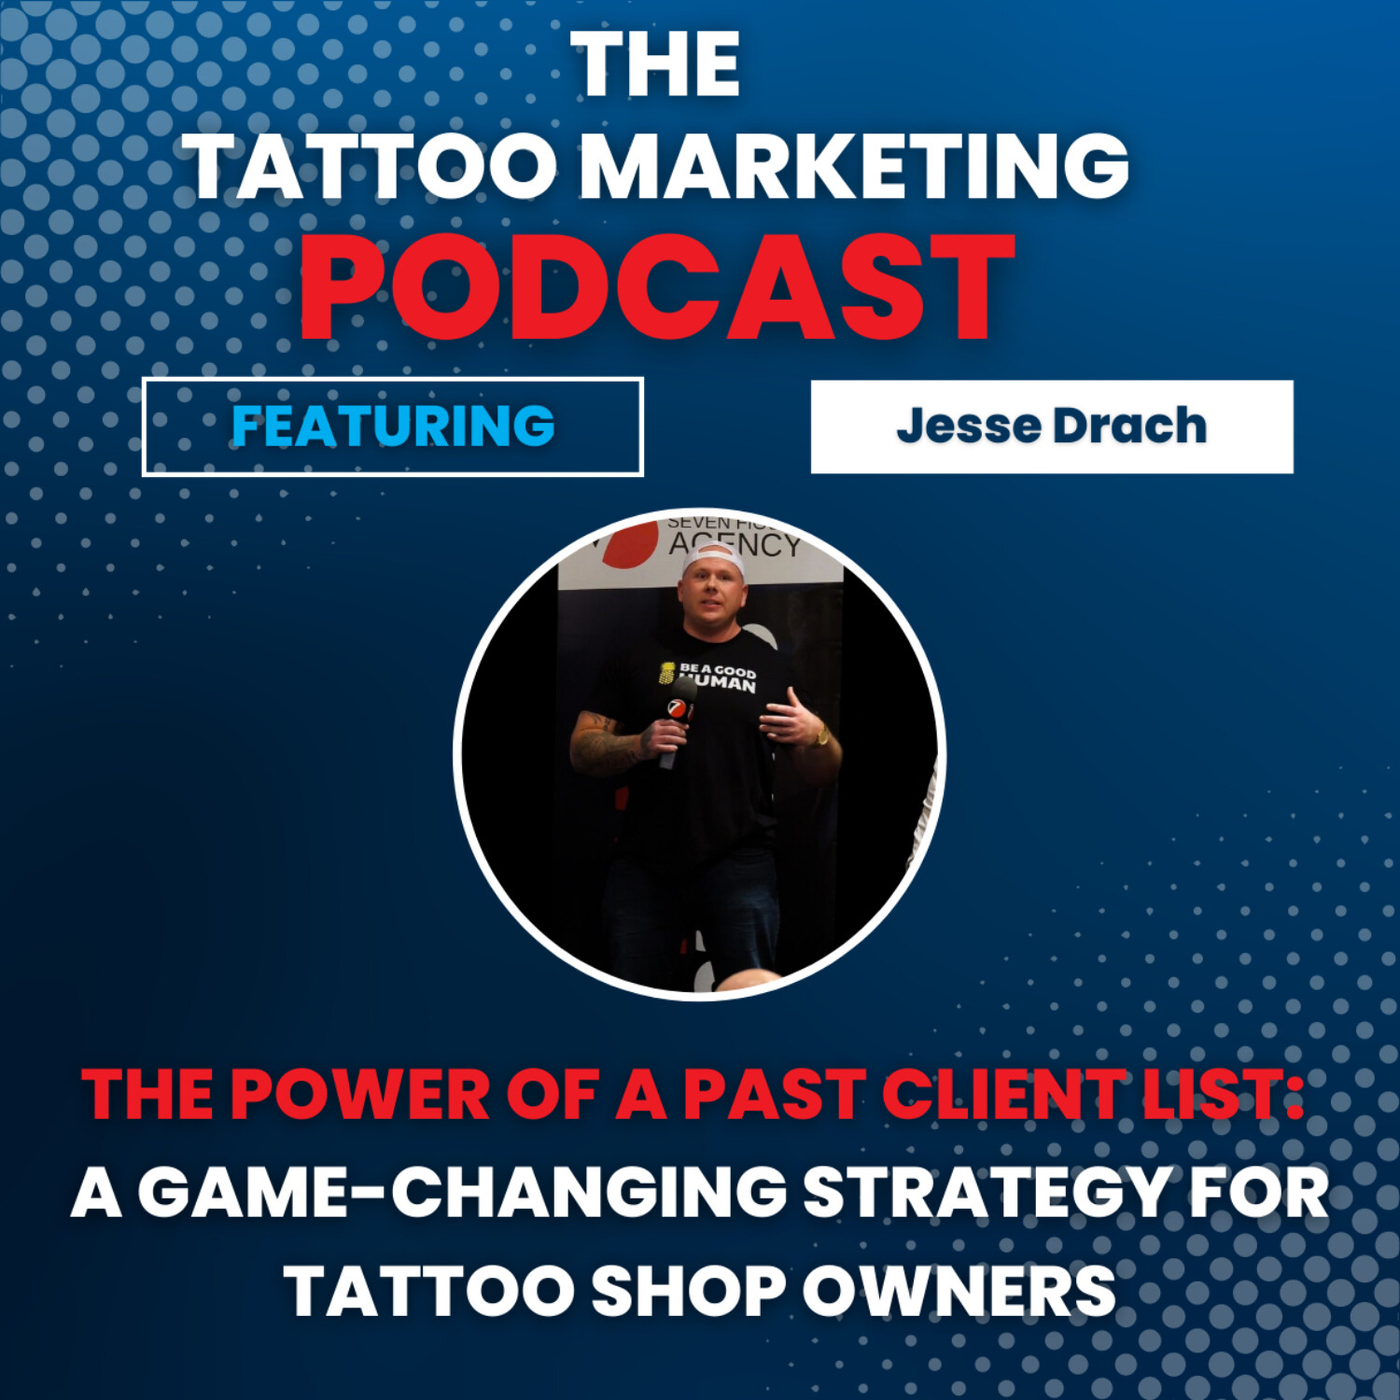 How To Market / Advertise For Your Tattoo Shop - YouTube